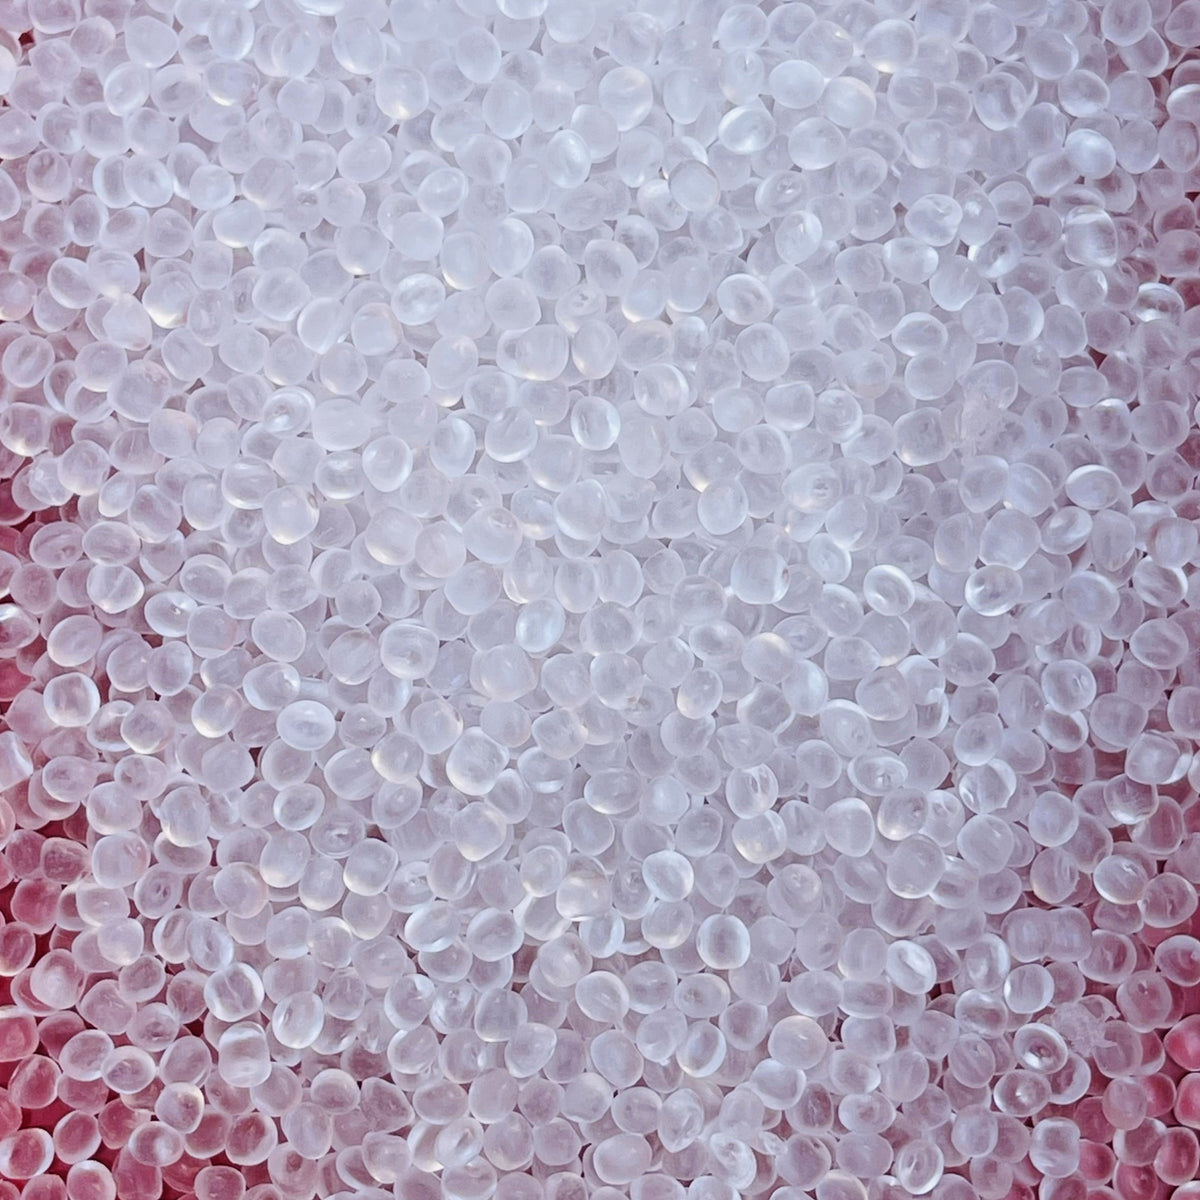 1lb & 2lbs, Scented Aroma Beads. BOTH CLEAR BEADS AND COLORED BEADS  AVAILABLE!